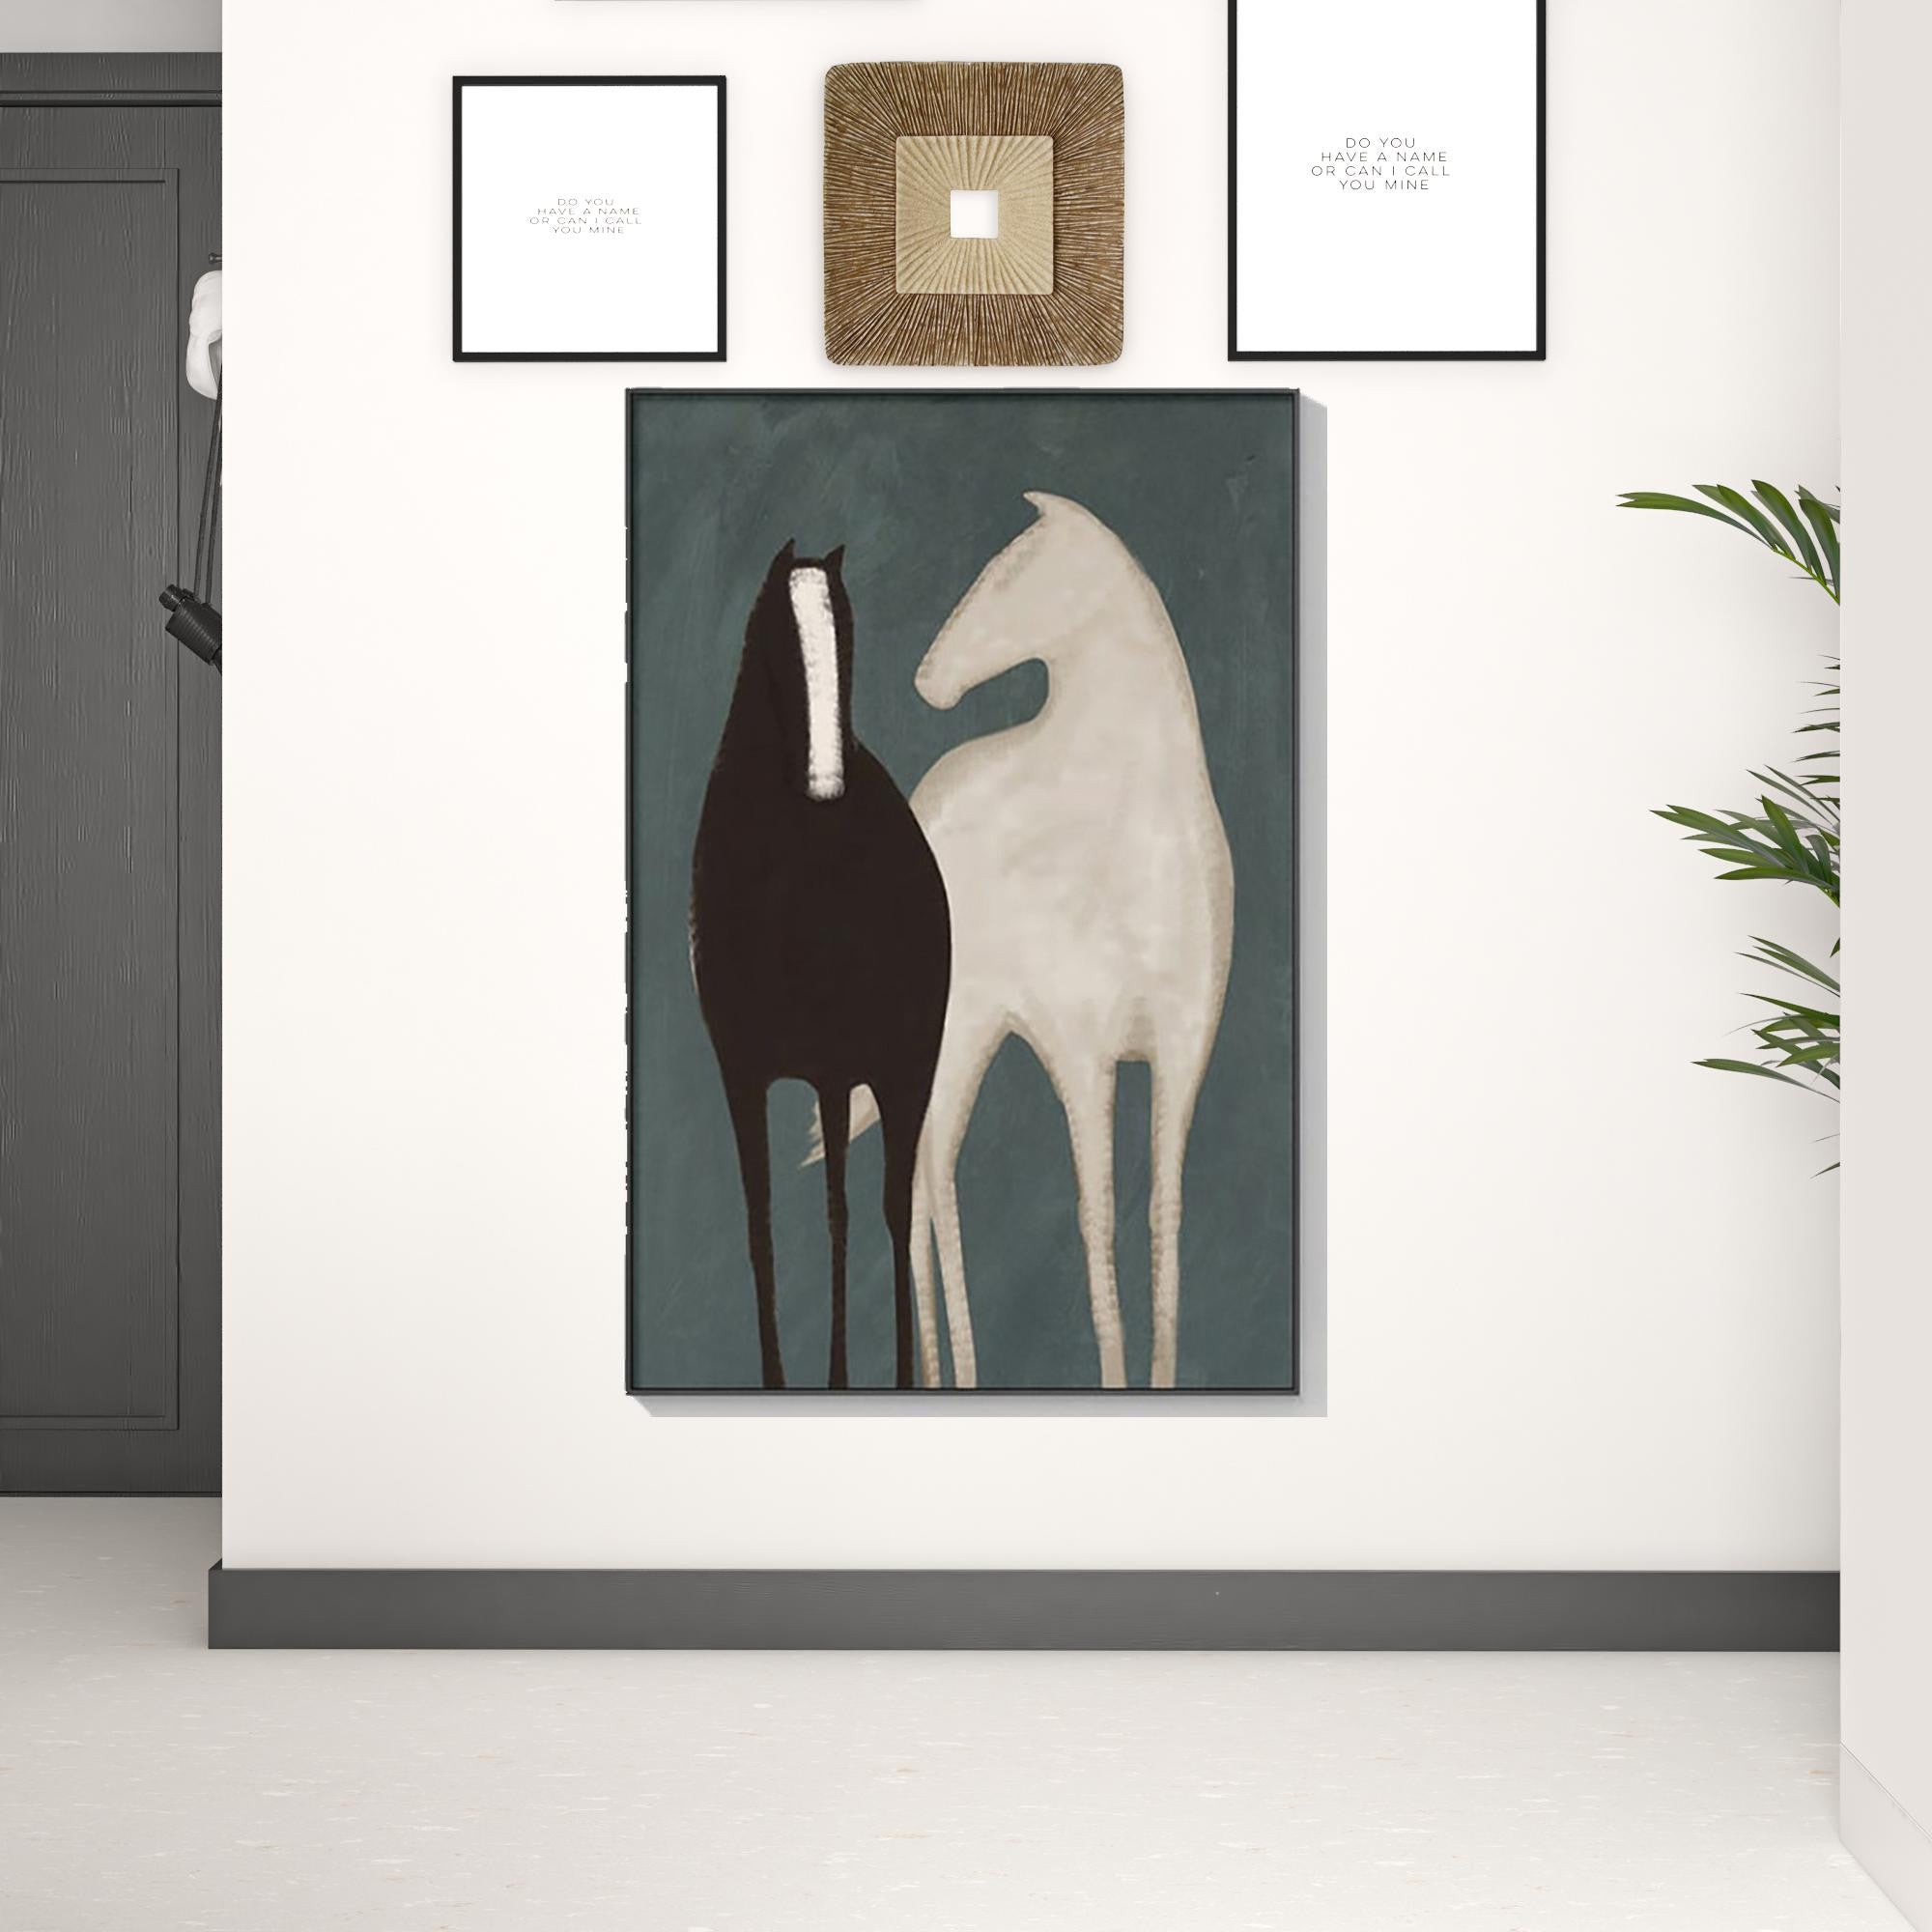 Black and White Fabric Horse Wall Decor